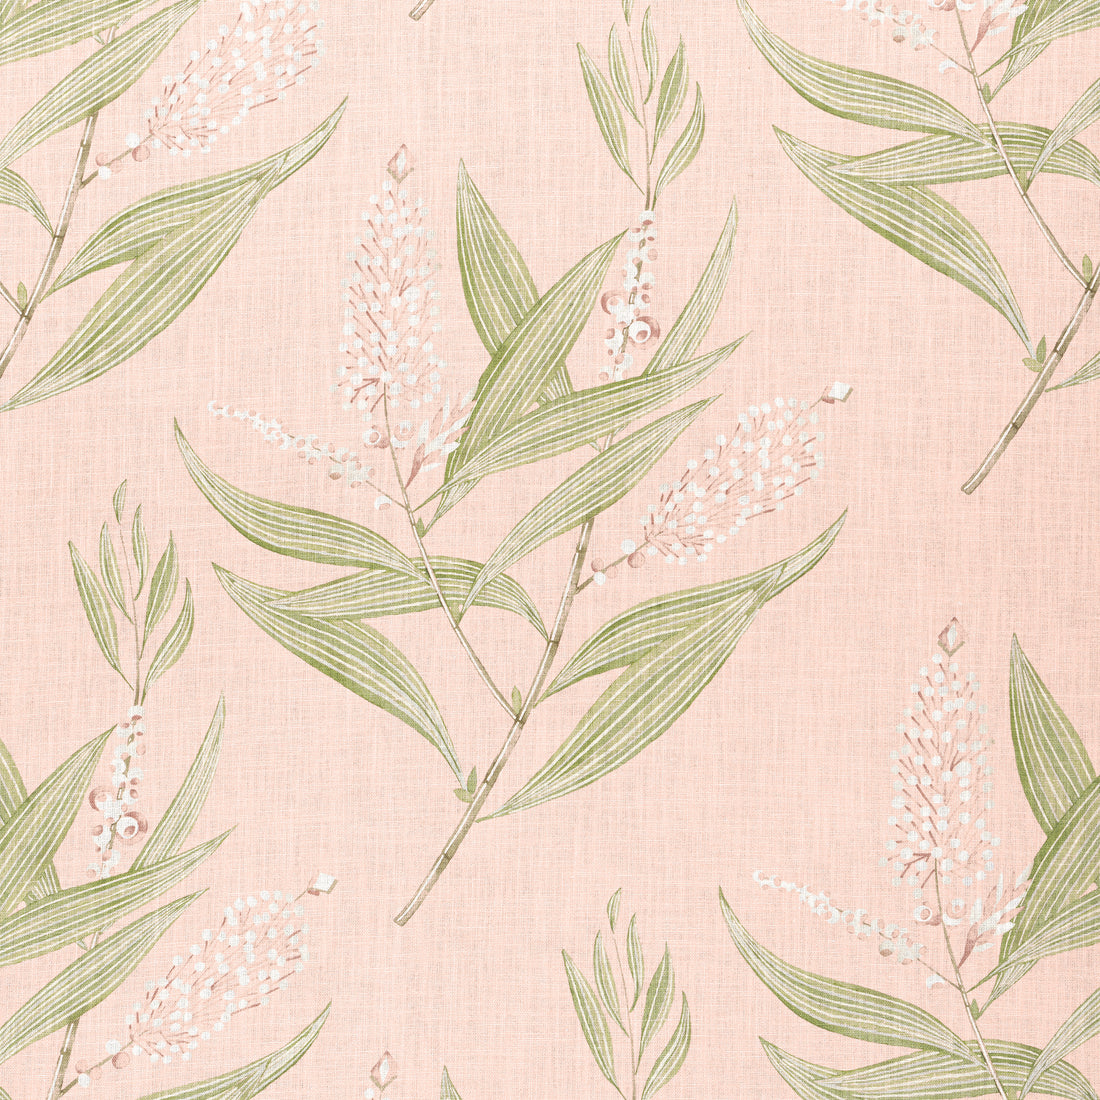 Winter Bud fabric in blush color - pattern number AF23132 - by Anna French in the Willow Tree collection